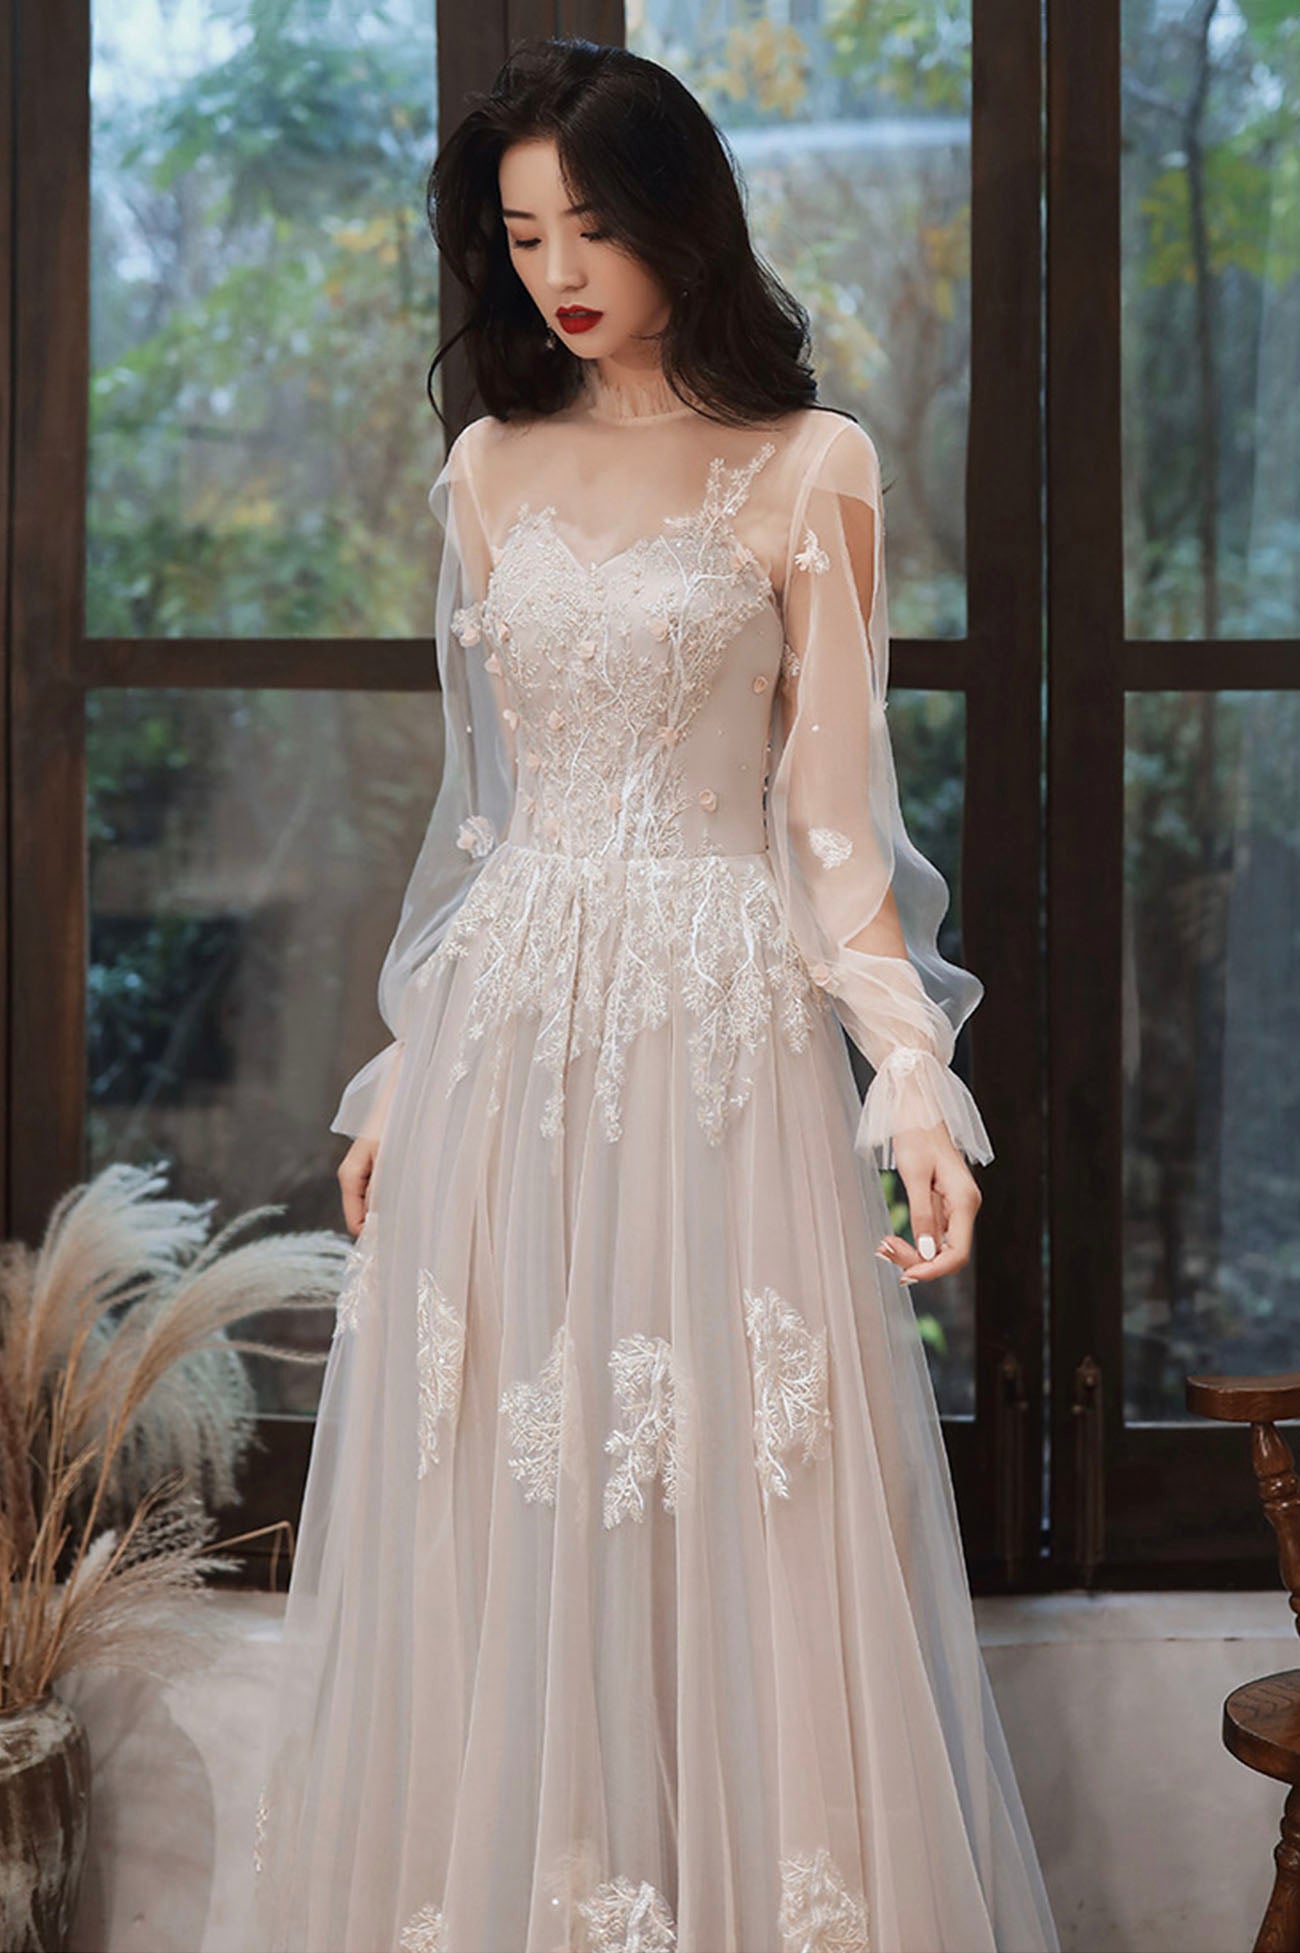 Cute A-Line Lace Floor Length Prom Dress, Long Sleeve Evening Party Dress